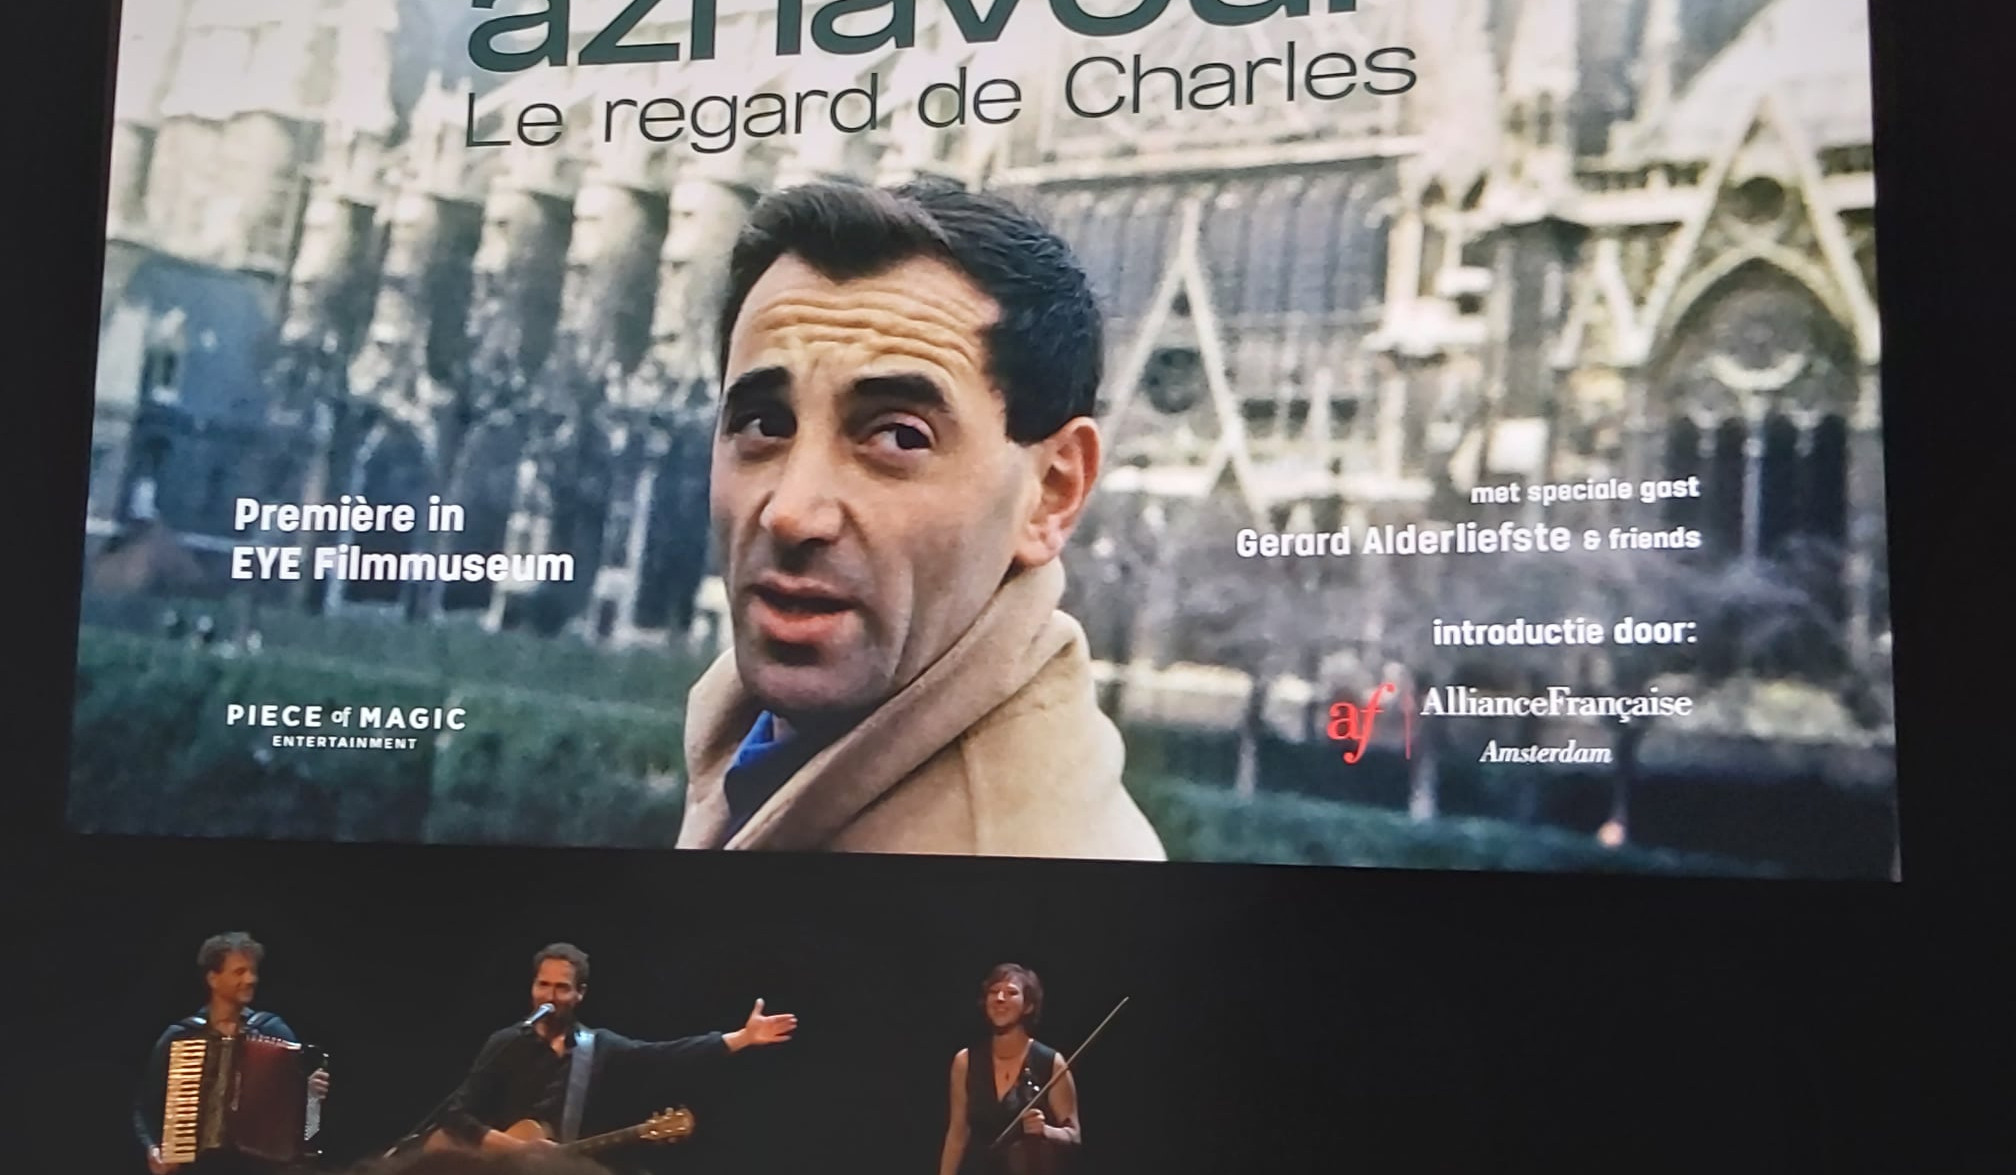 Screening of a film dedicated to Charles Aznavour in Amsterdam